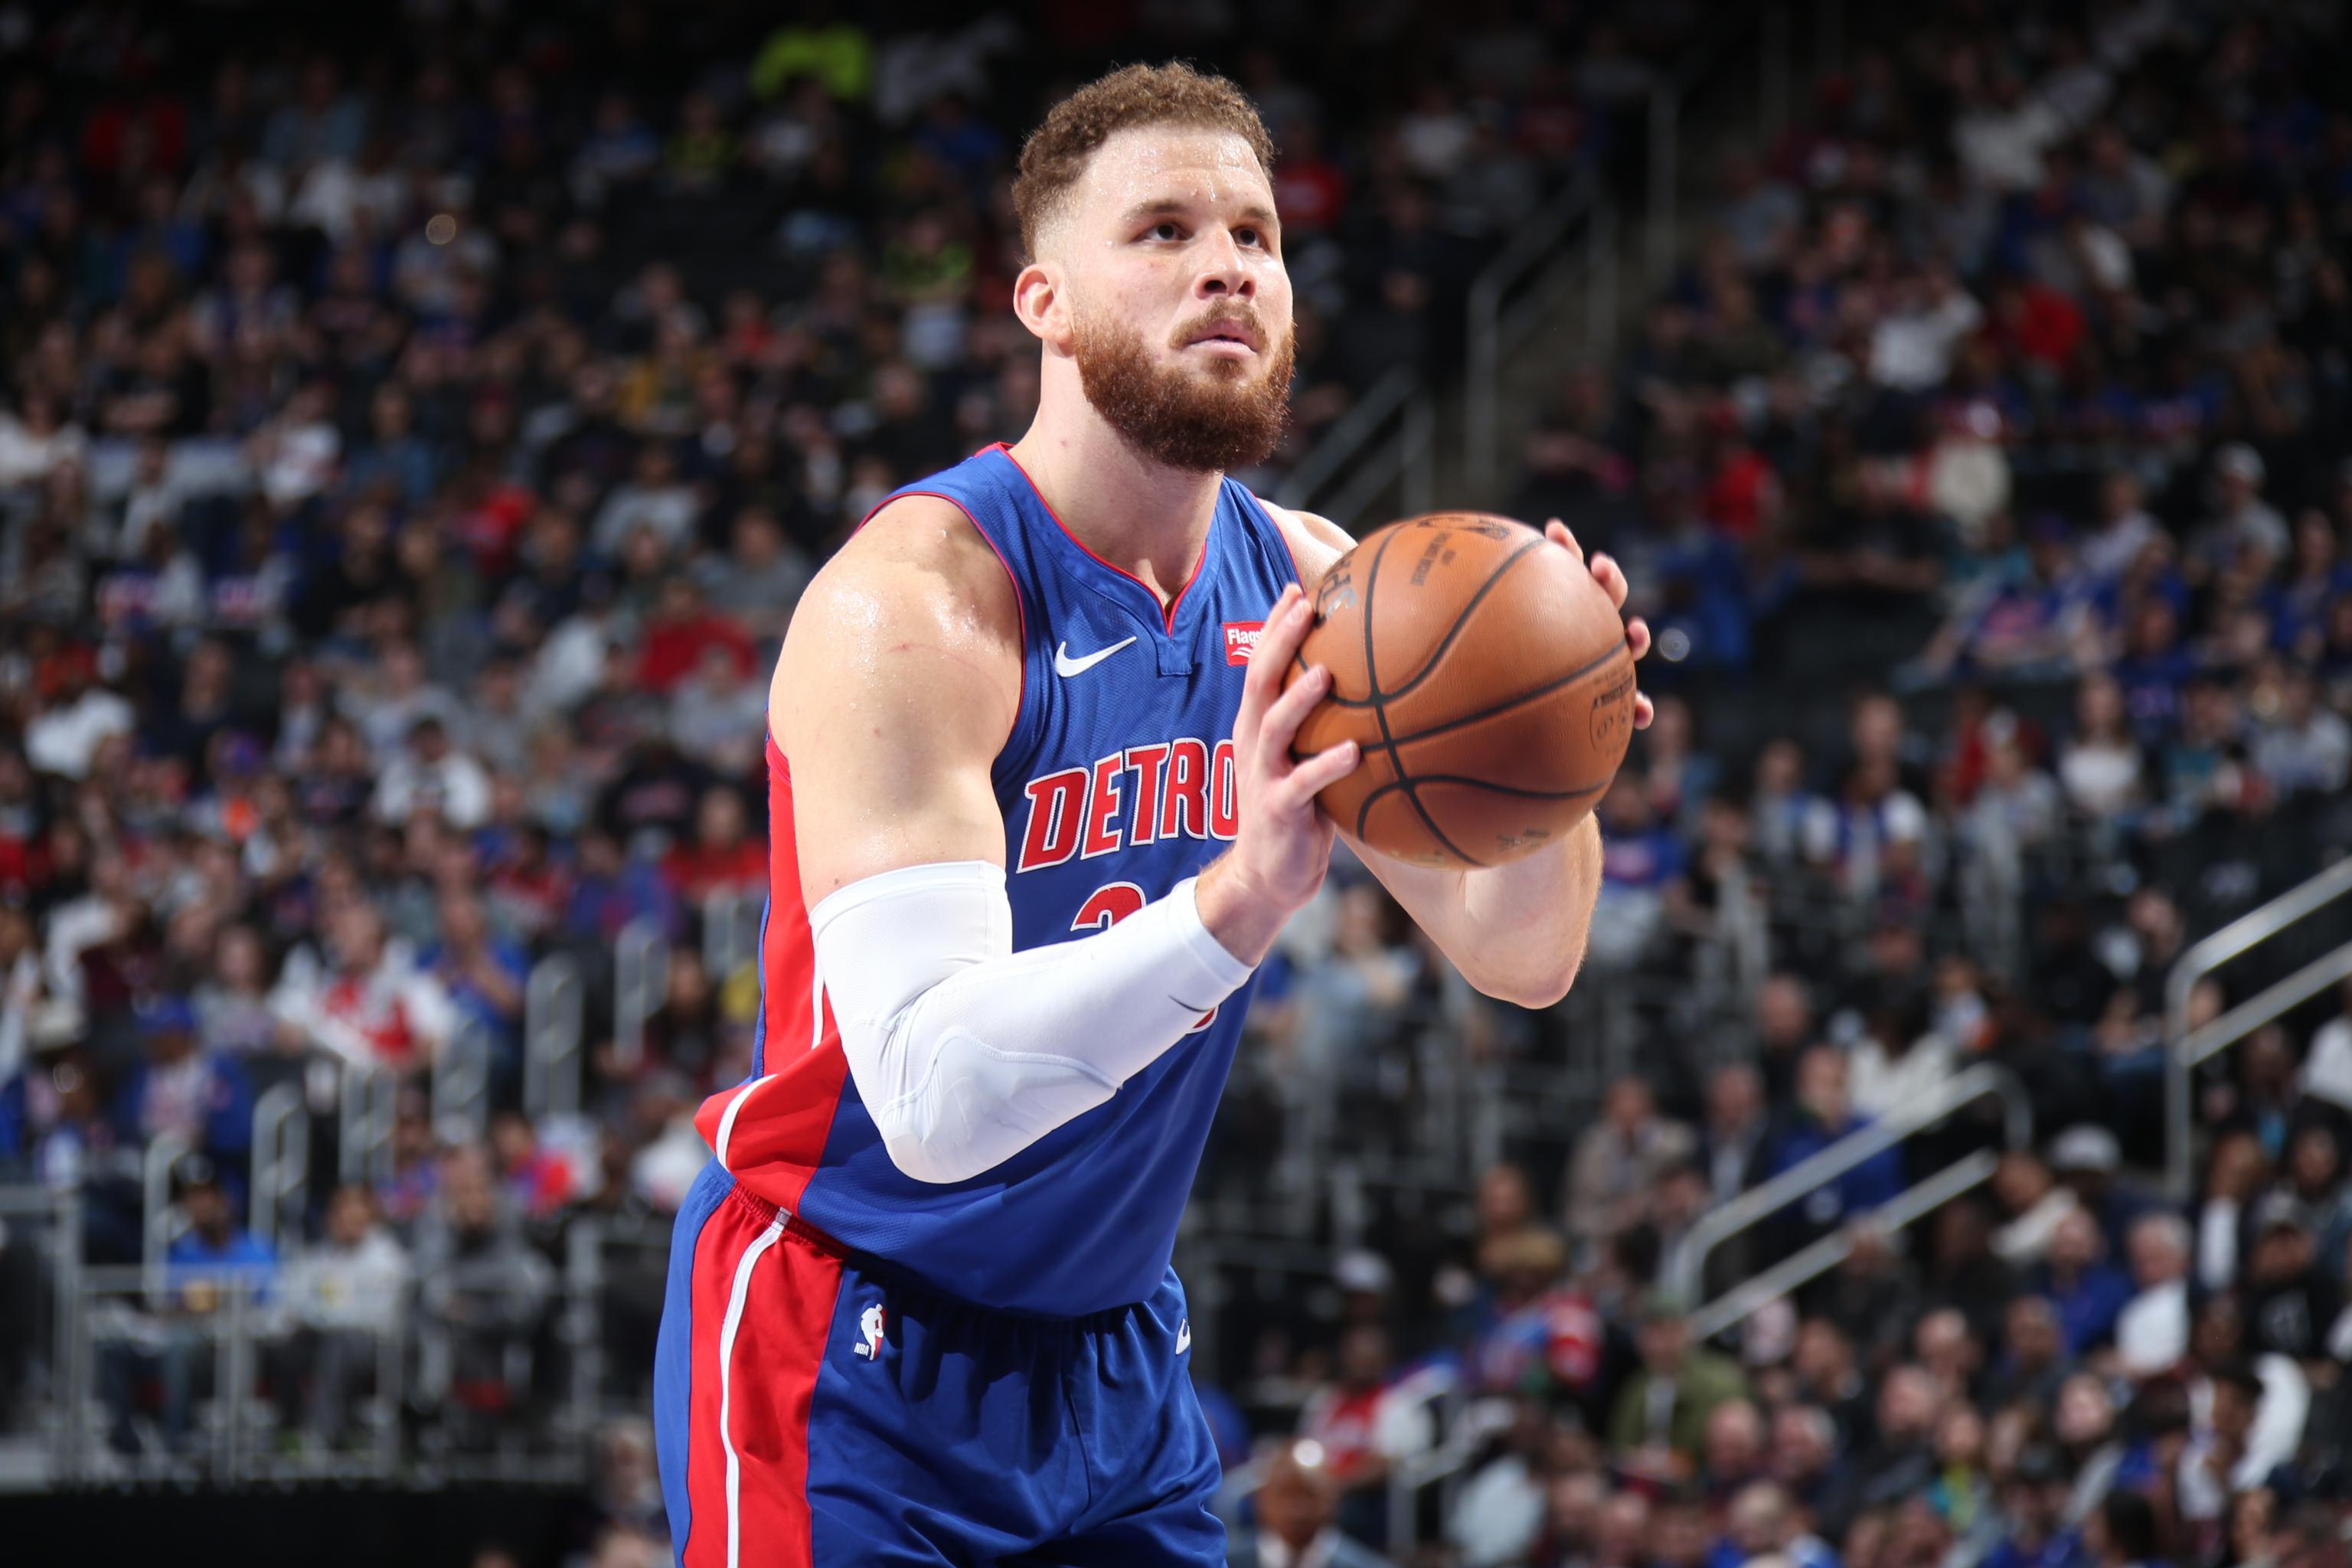 Blake Griffin (pictured here) may be on the decline. Can he overcome his injury history for the Detroit Pistons.